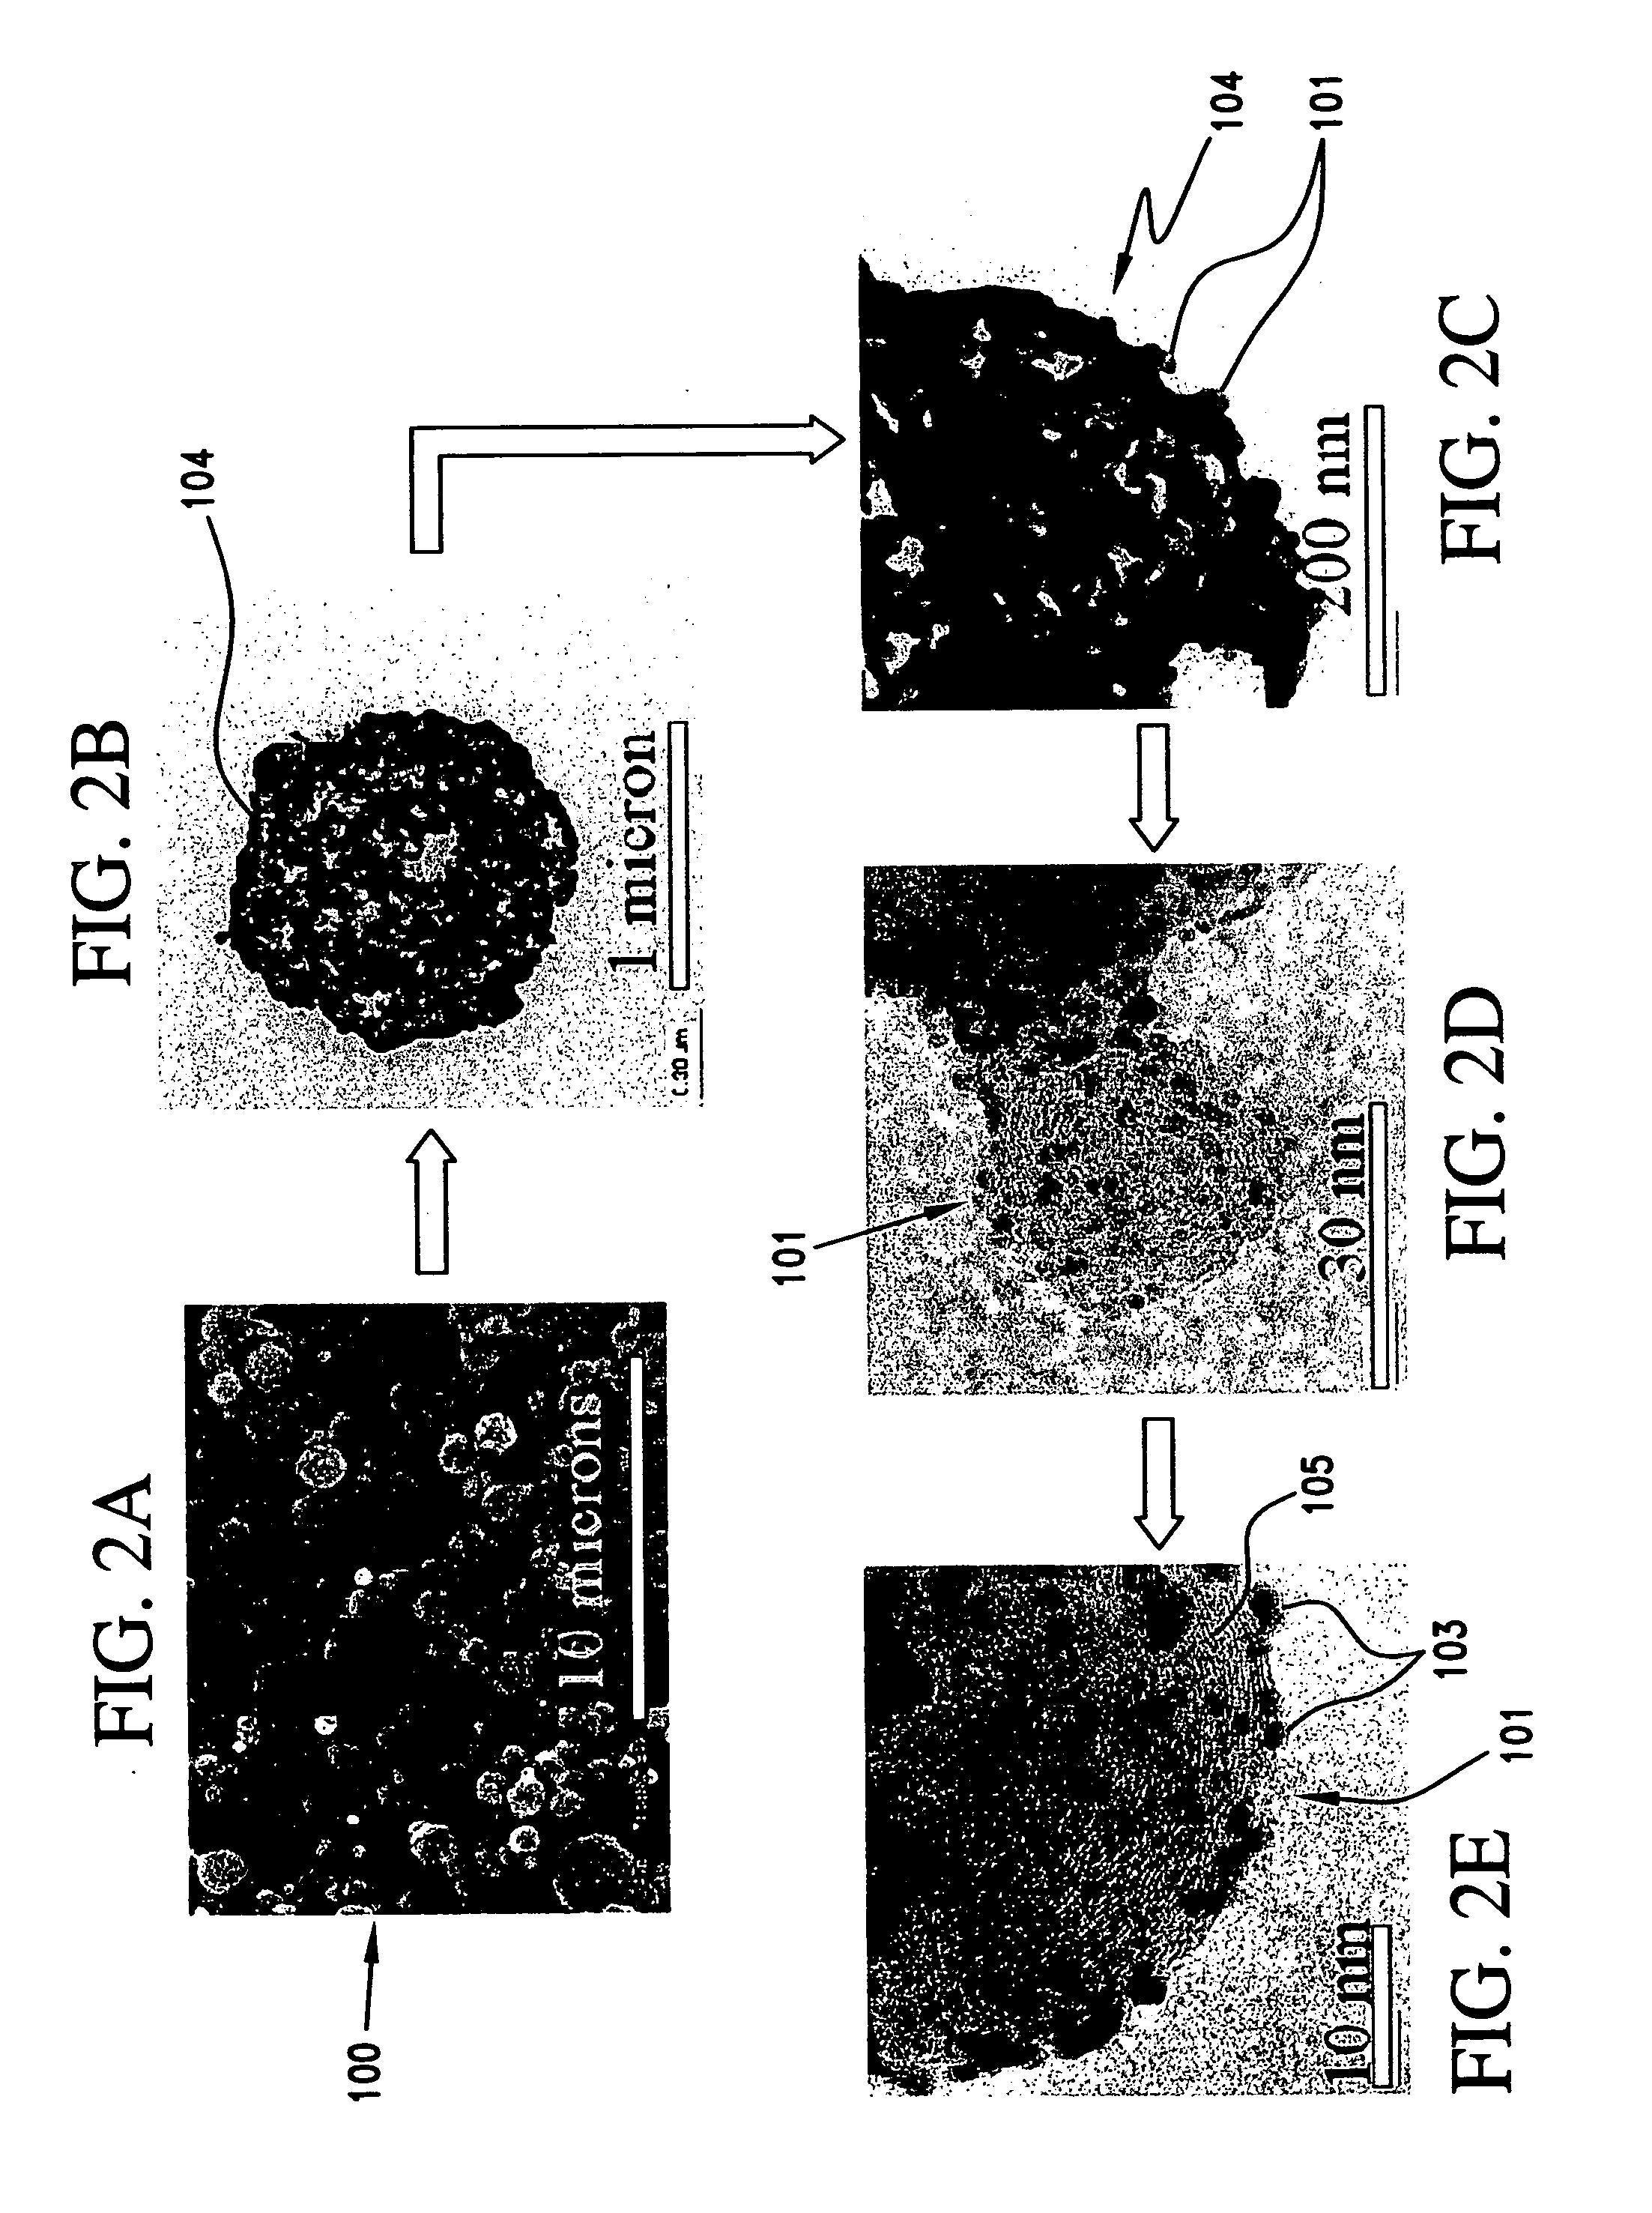 Alloy catalyst compositions and processes for making and using same